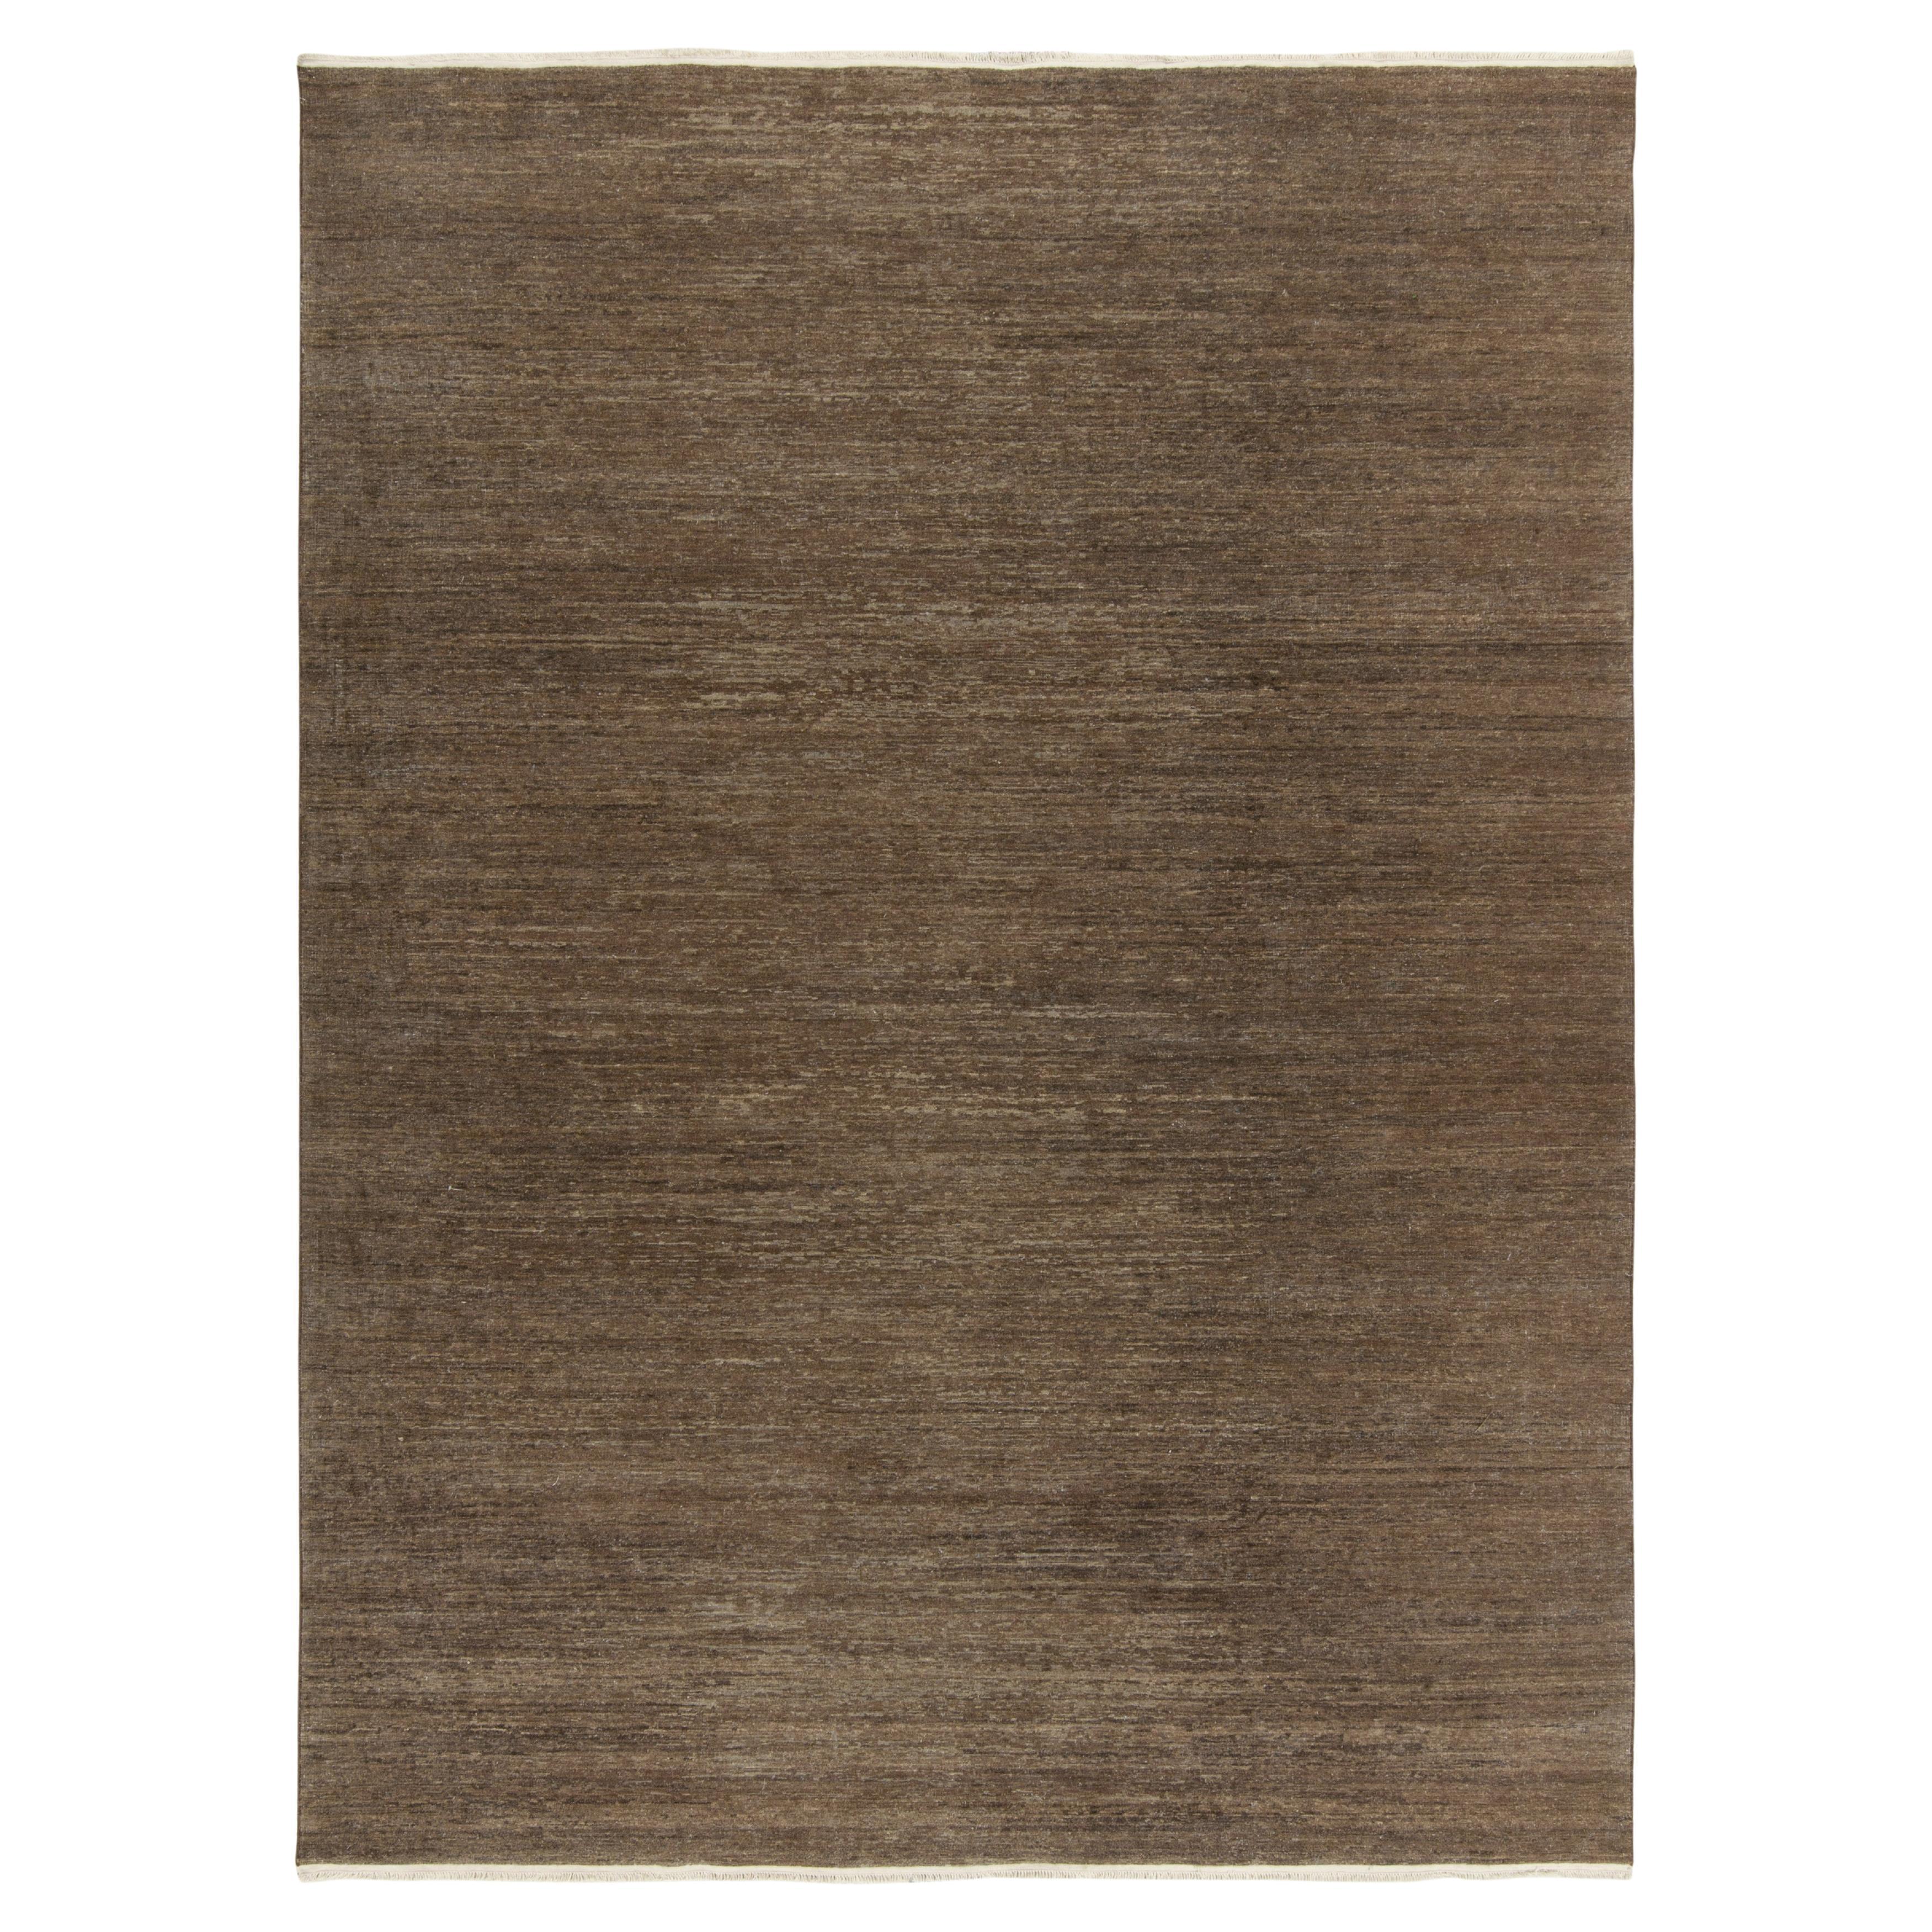 Rug & Kilim’s Contemporary Textural Rug in Brown, Simple Solid Striae